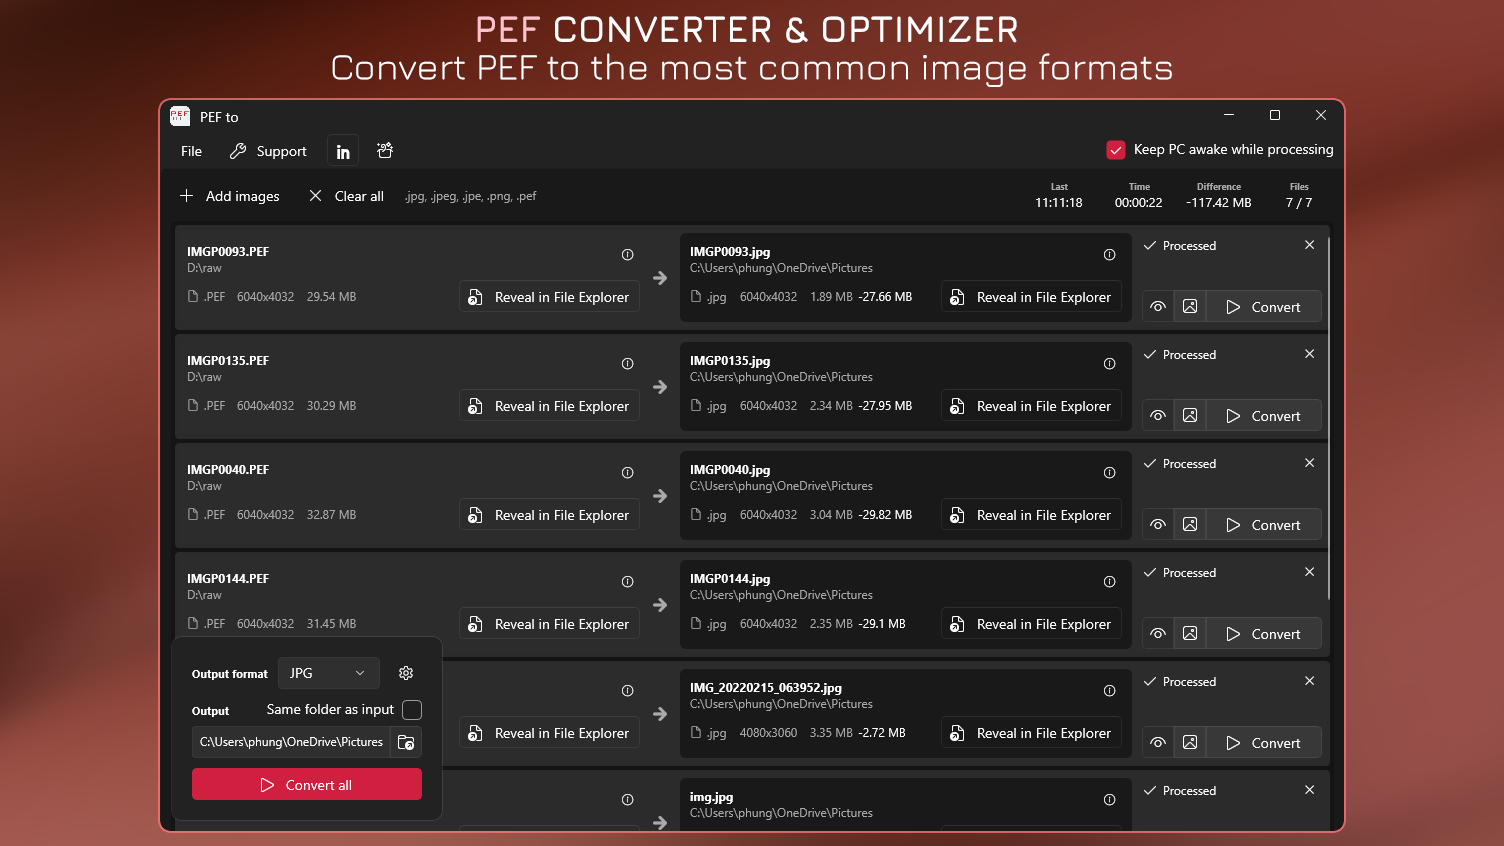 PEF Converter & Optimizer - Convert PEF to the most common image formats.